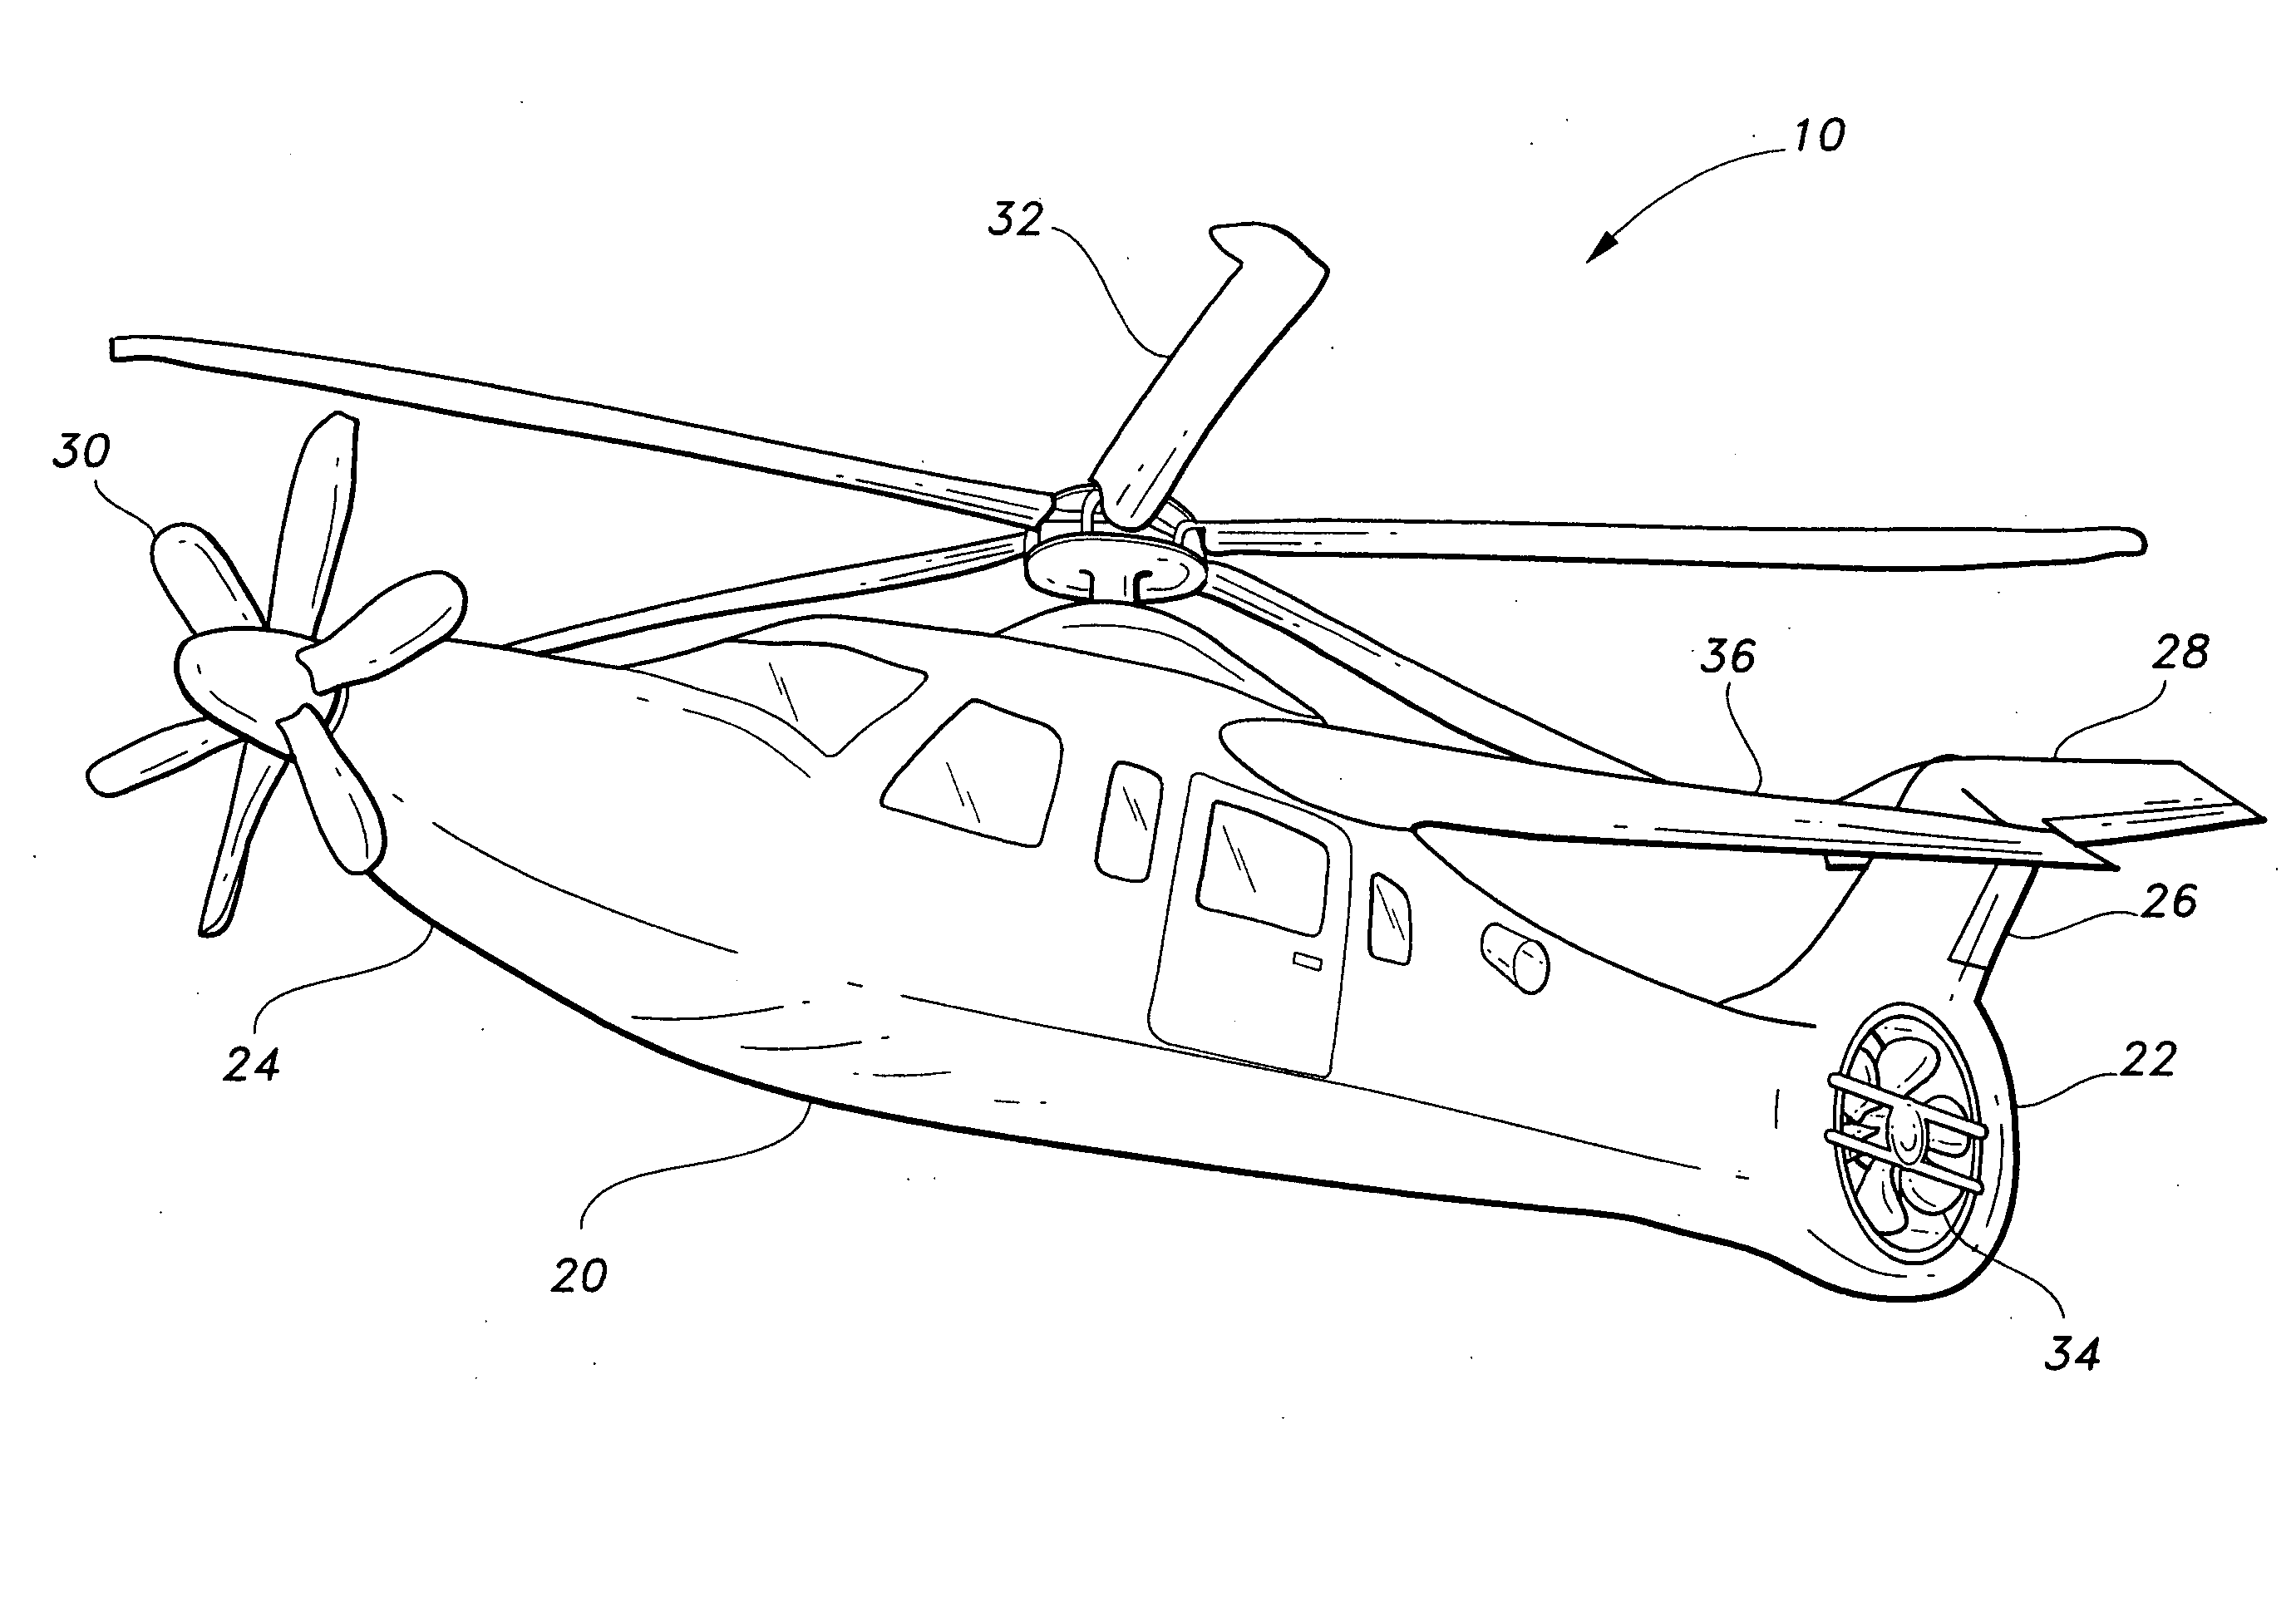 Compound helicopter